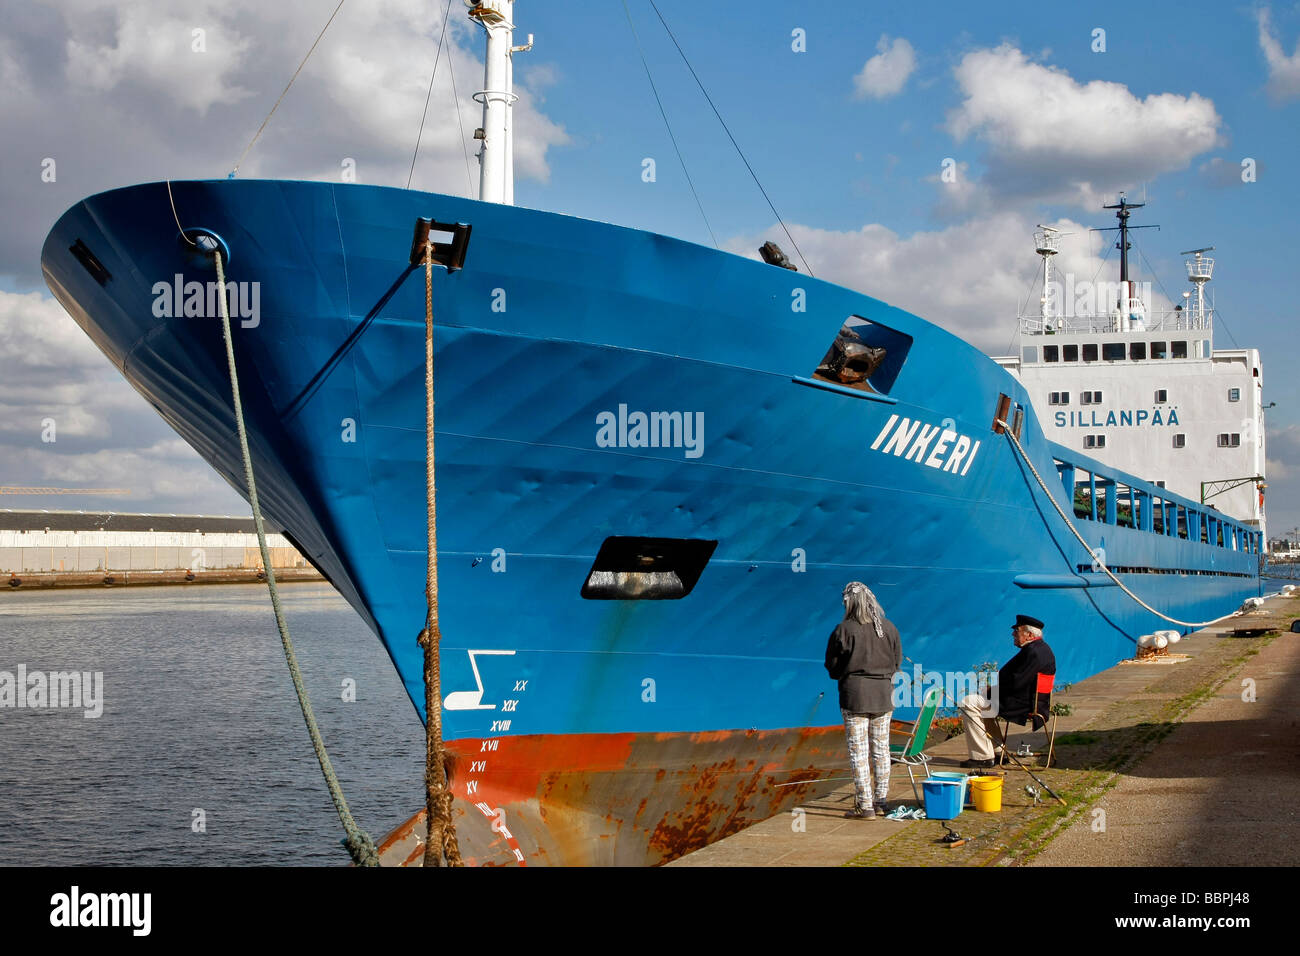 LINE FISHERMEN IN FRONT OF A DOCKED CARGO BOAT IN THE COMMERCIAL PORT, LE HAVRE, SEINE-MARITIME (76), NORMANDY, FRANCE Stock Photo